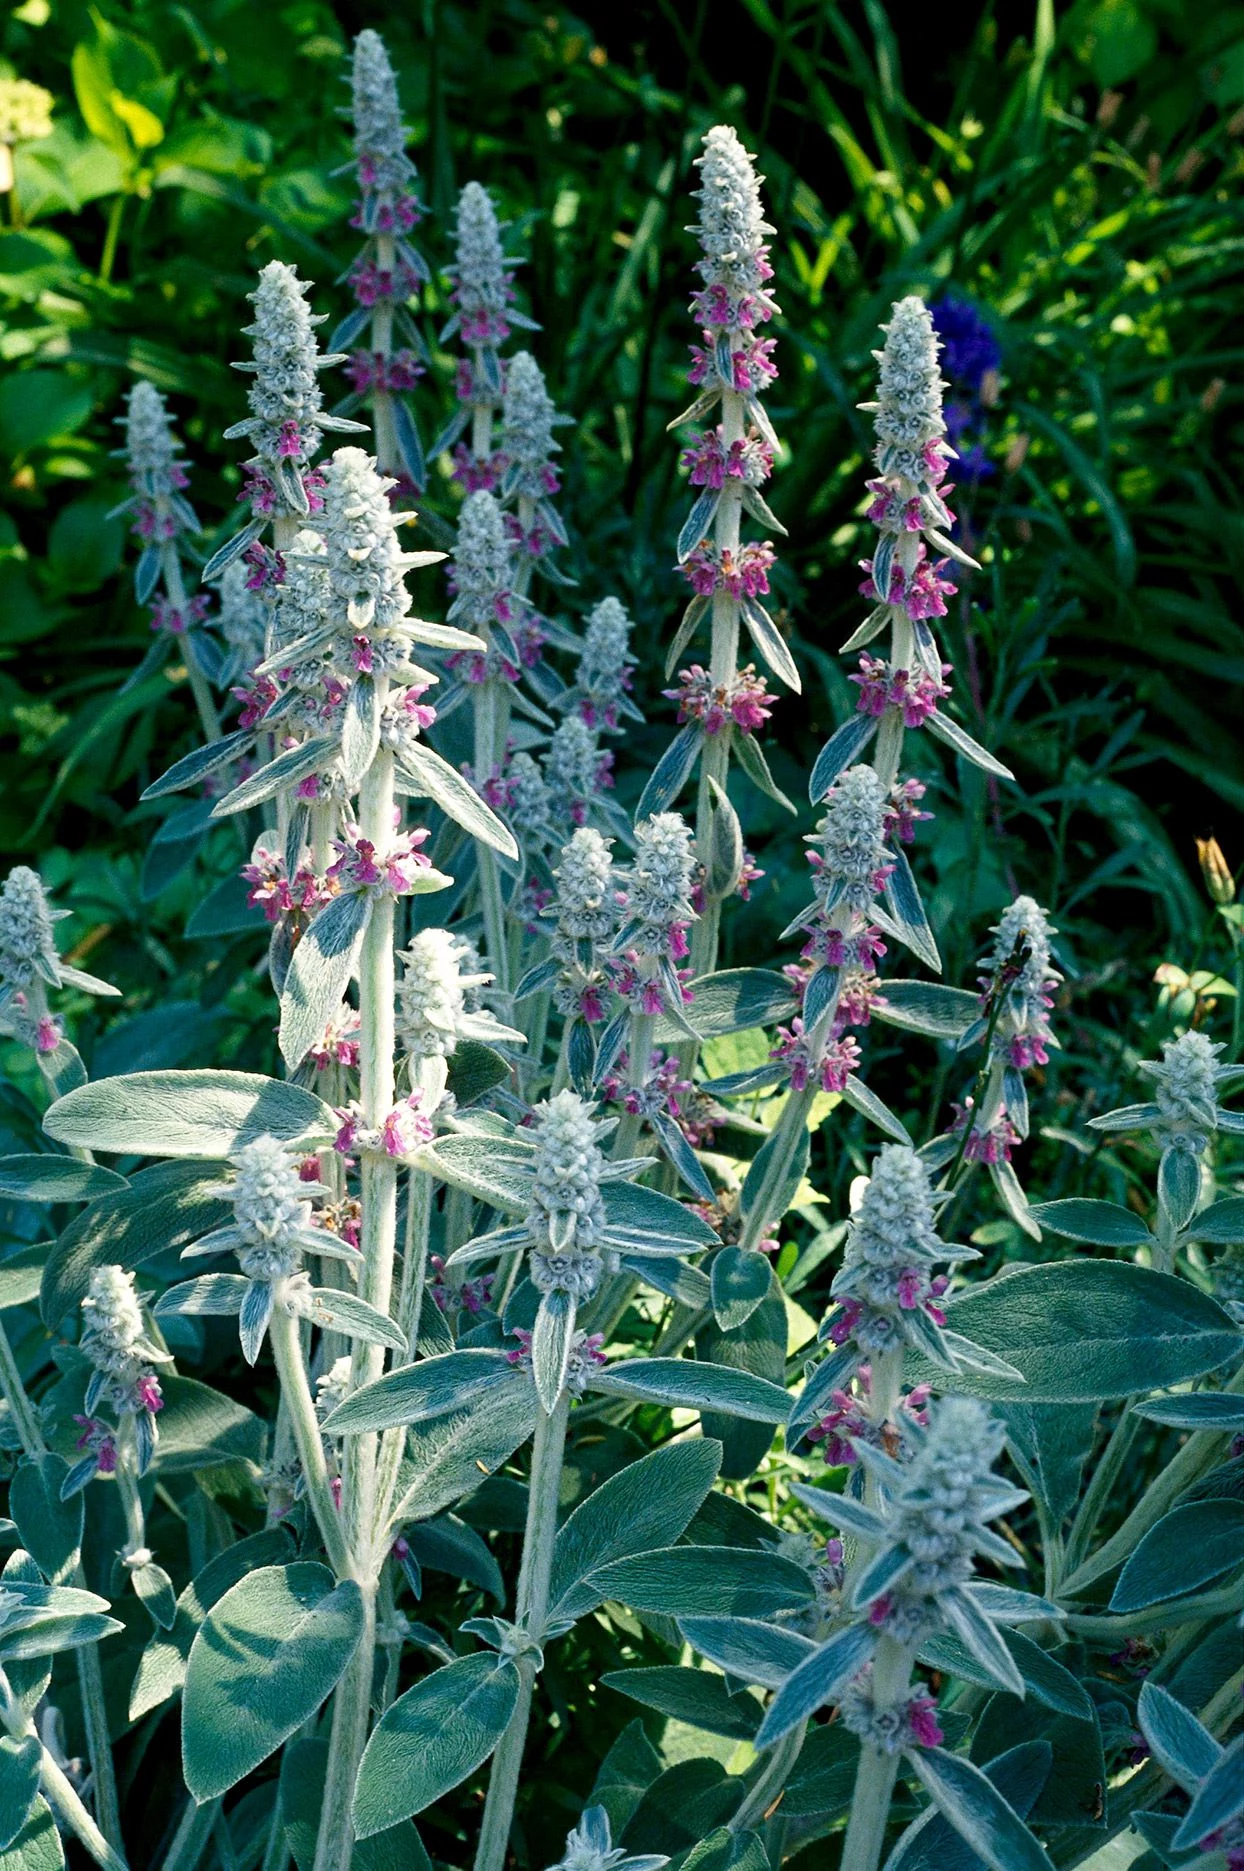 lambs ear flower and foliage